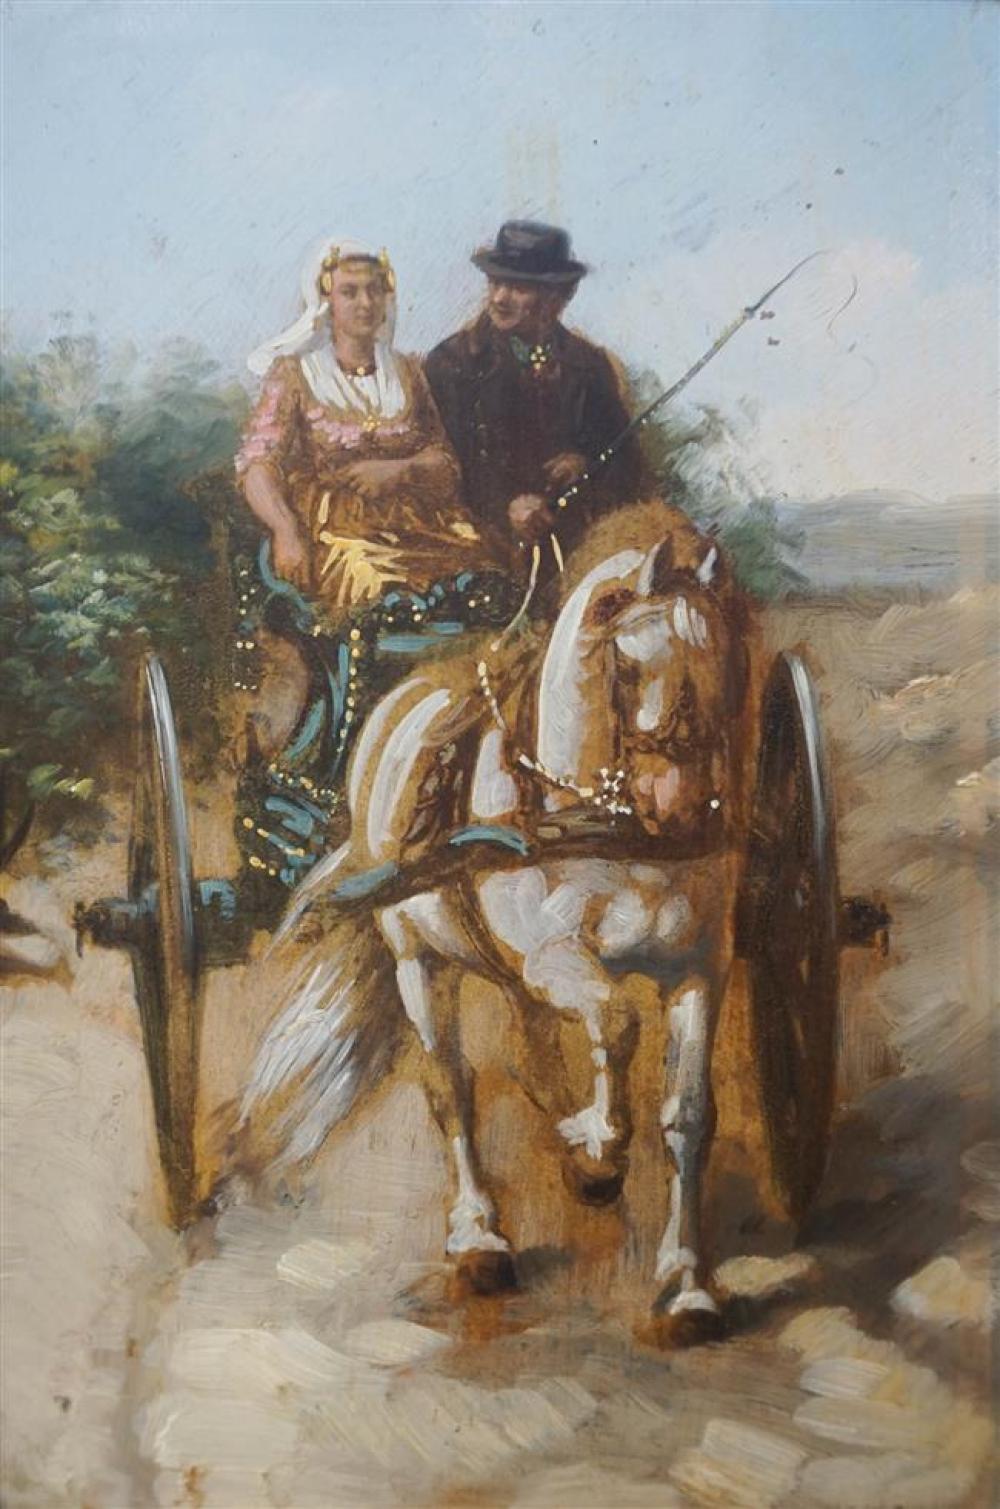 MAN AND WOMAN ON HORSE DRAWN CARRIAGE  325987